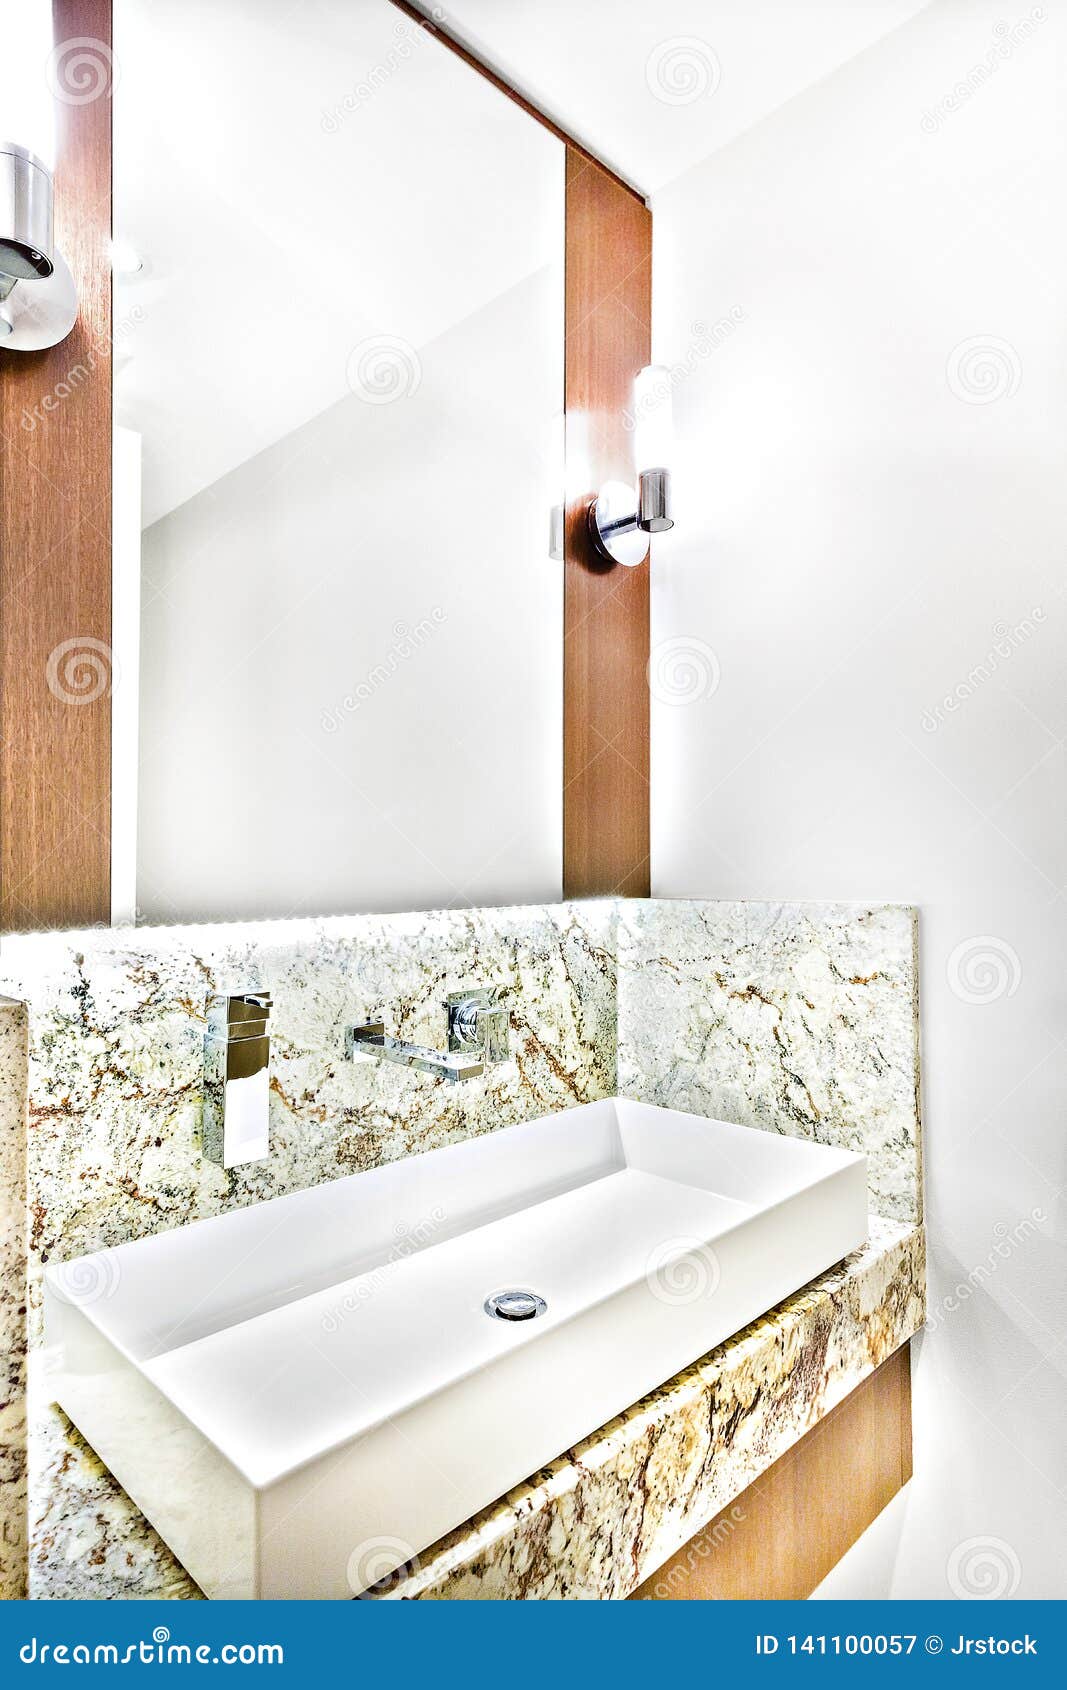 Modern Wash Area With Ceramics And Mirror Stock Image